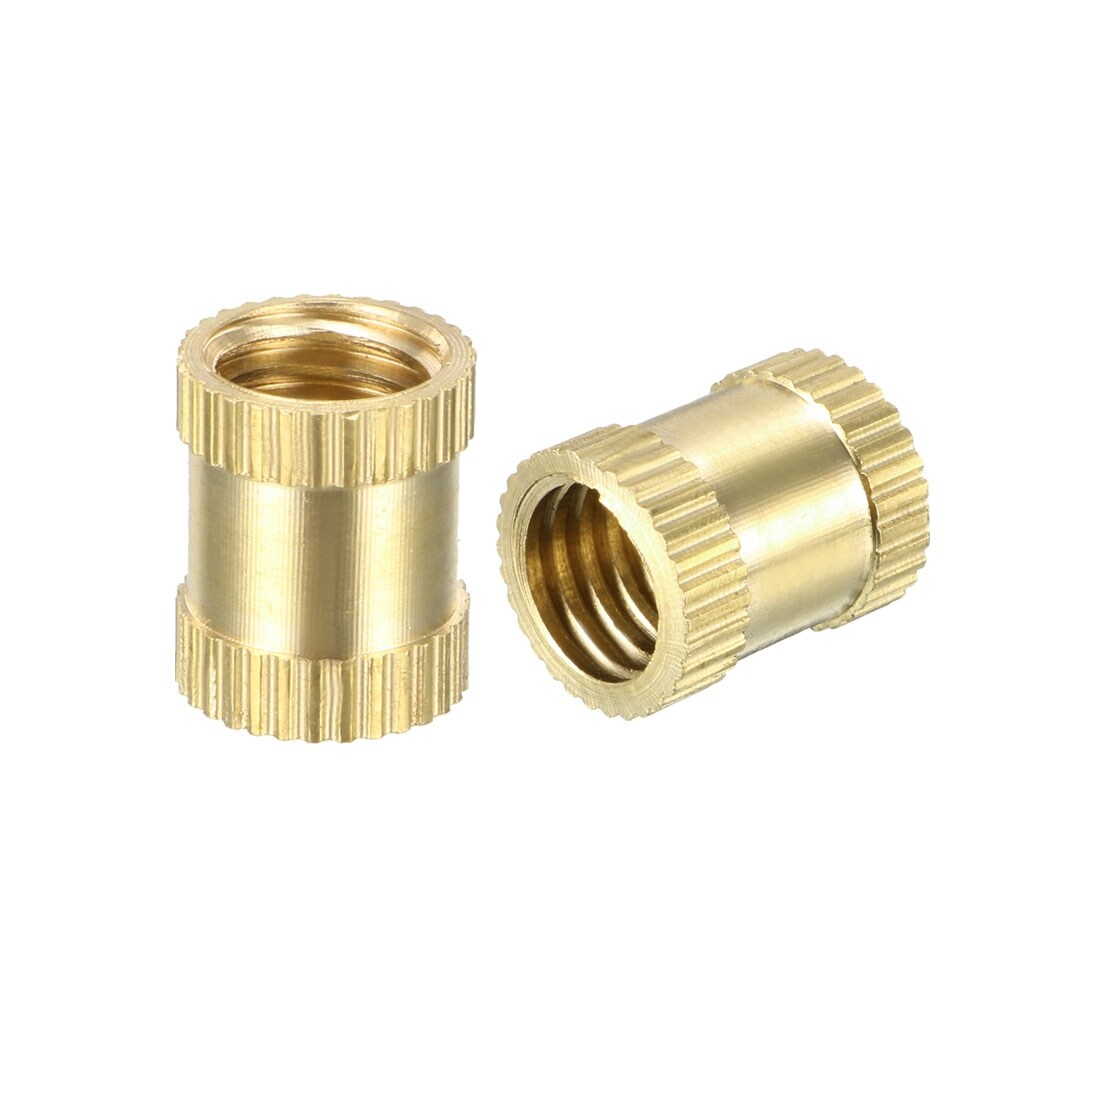 Brass Heat-Set Knurled Inserts for Plastic (Pack of 10) –